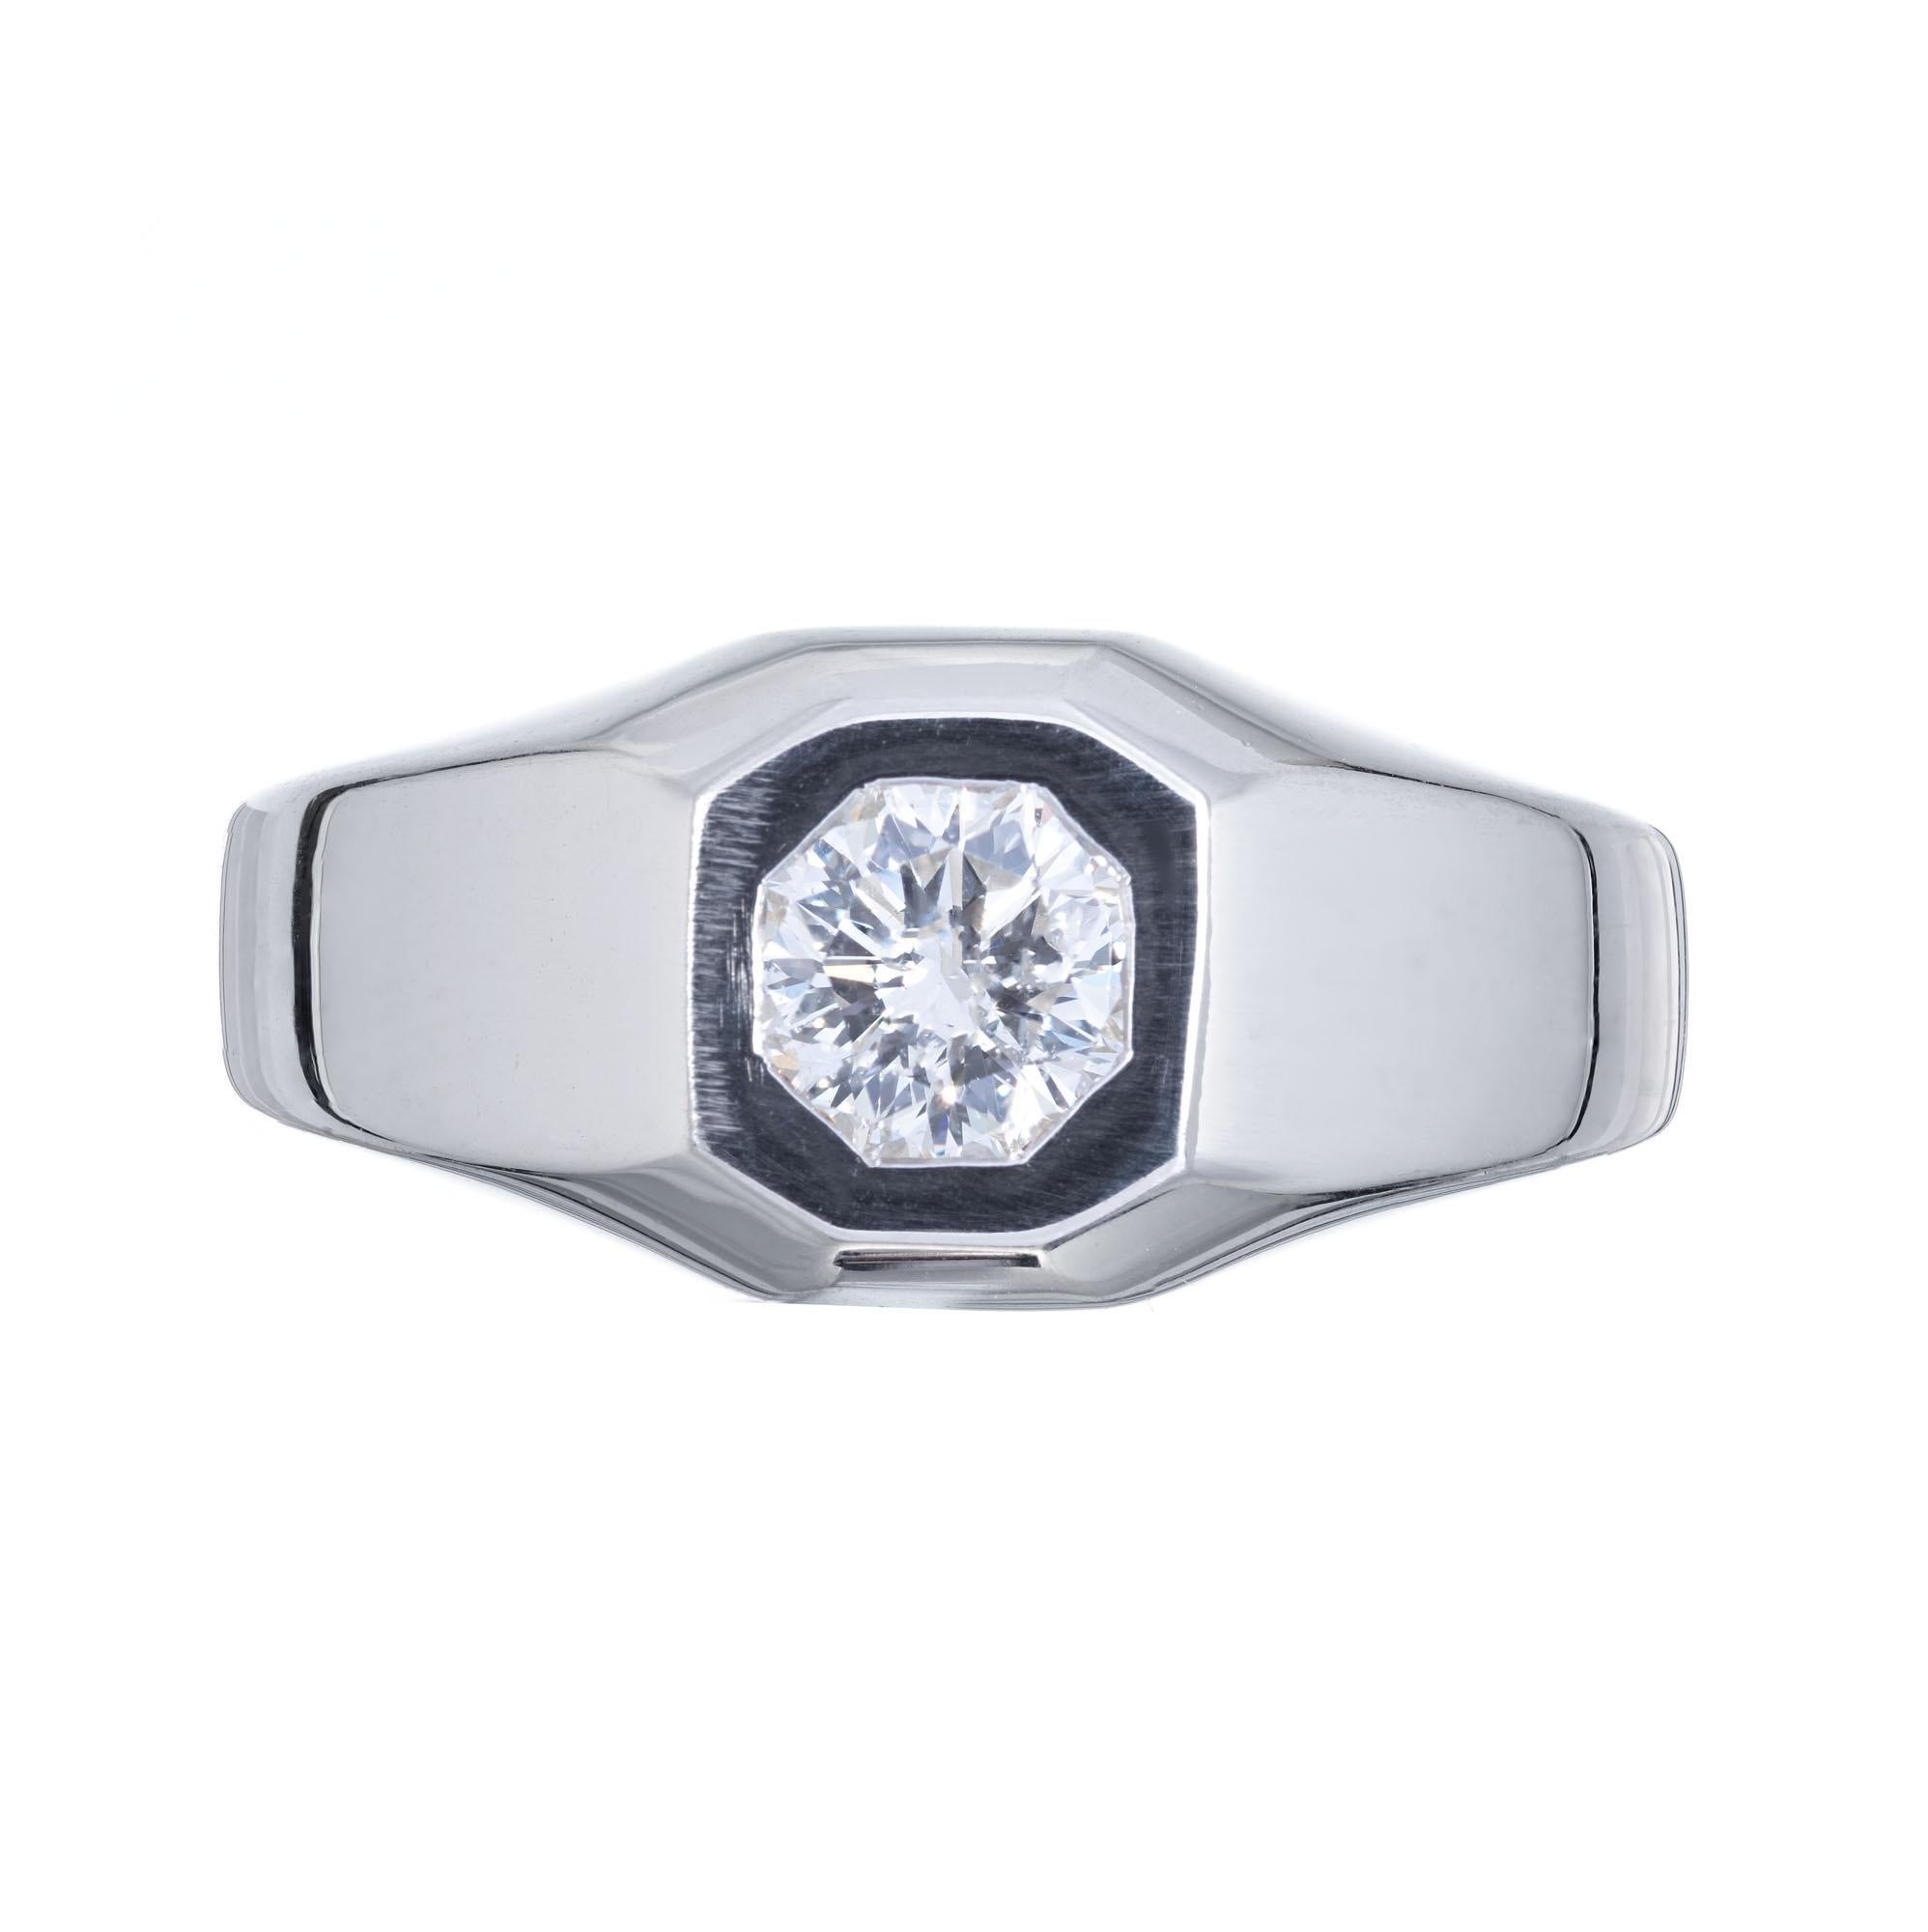 GIA certified diamond, in an eight-sided 14k white gold unisex setting. Created in the Peter Suchy workshop.

1 octagonal brilliant cut diamond H SI2, approx. .70cts  GIA Certificate # 5172585309
Size 8 and sizable
14k white gold 
Stamped: 14k
8.7